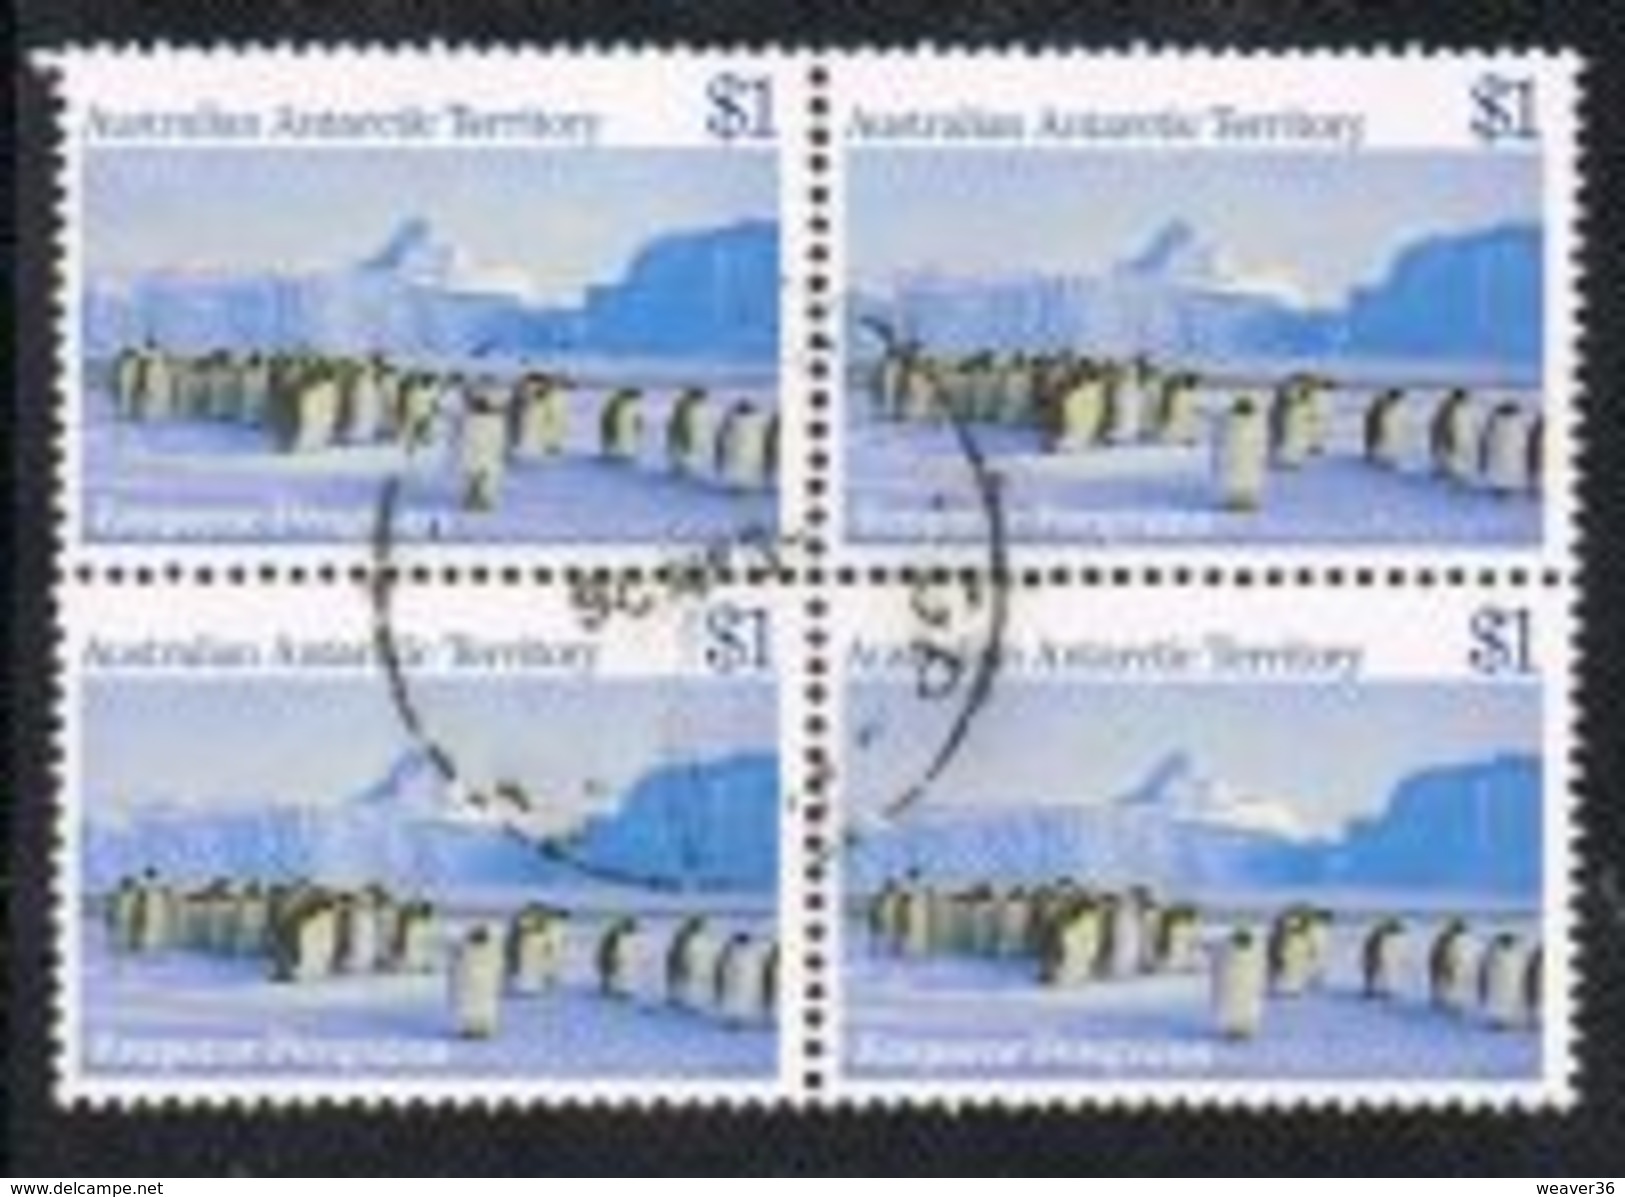 Australian Antarctic Territory SG77 1985 Definitive $1 Good/fine Used Block Of 4 [9/11368/6D] - Used Stamps